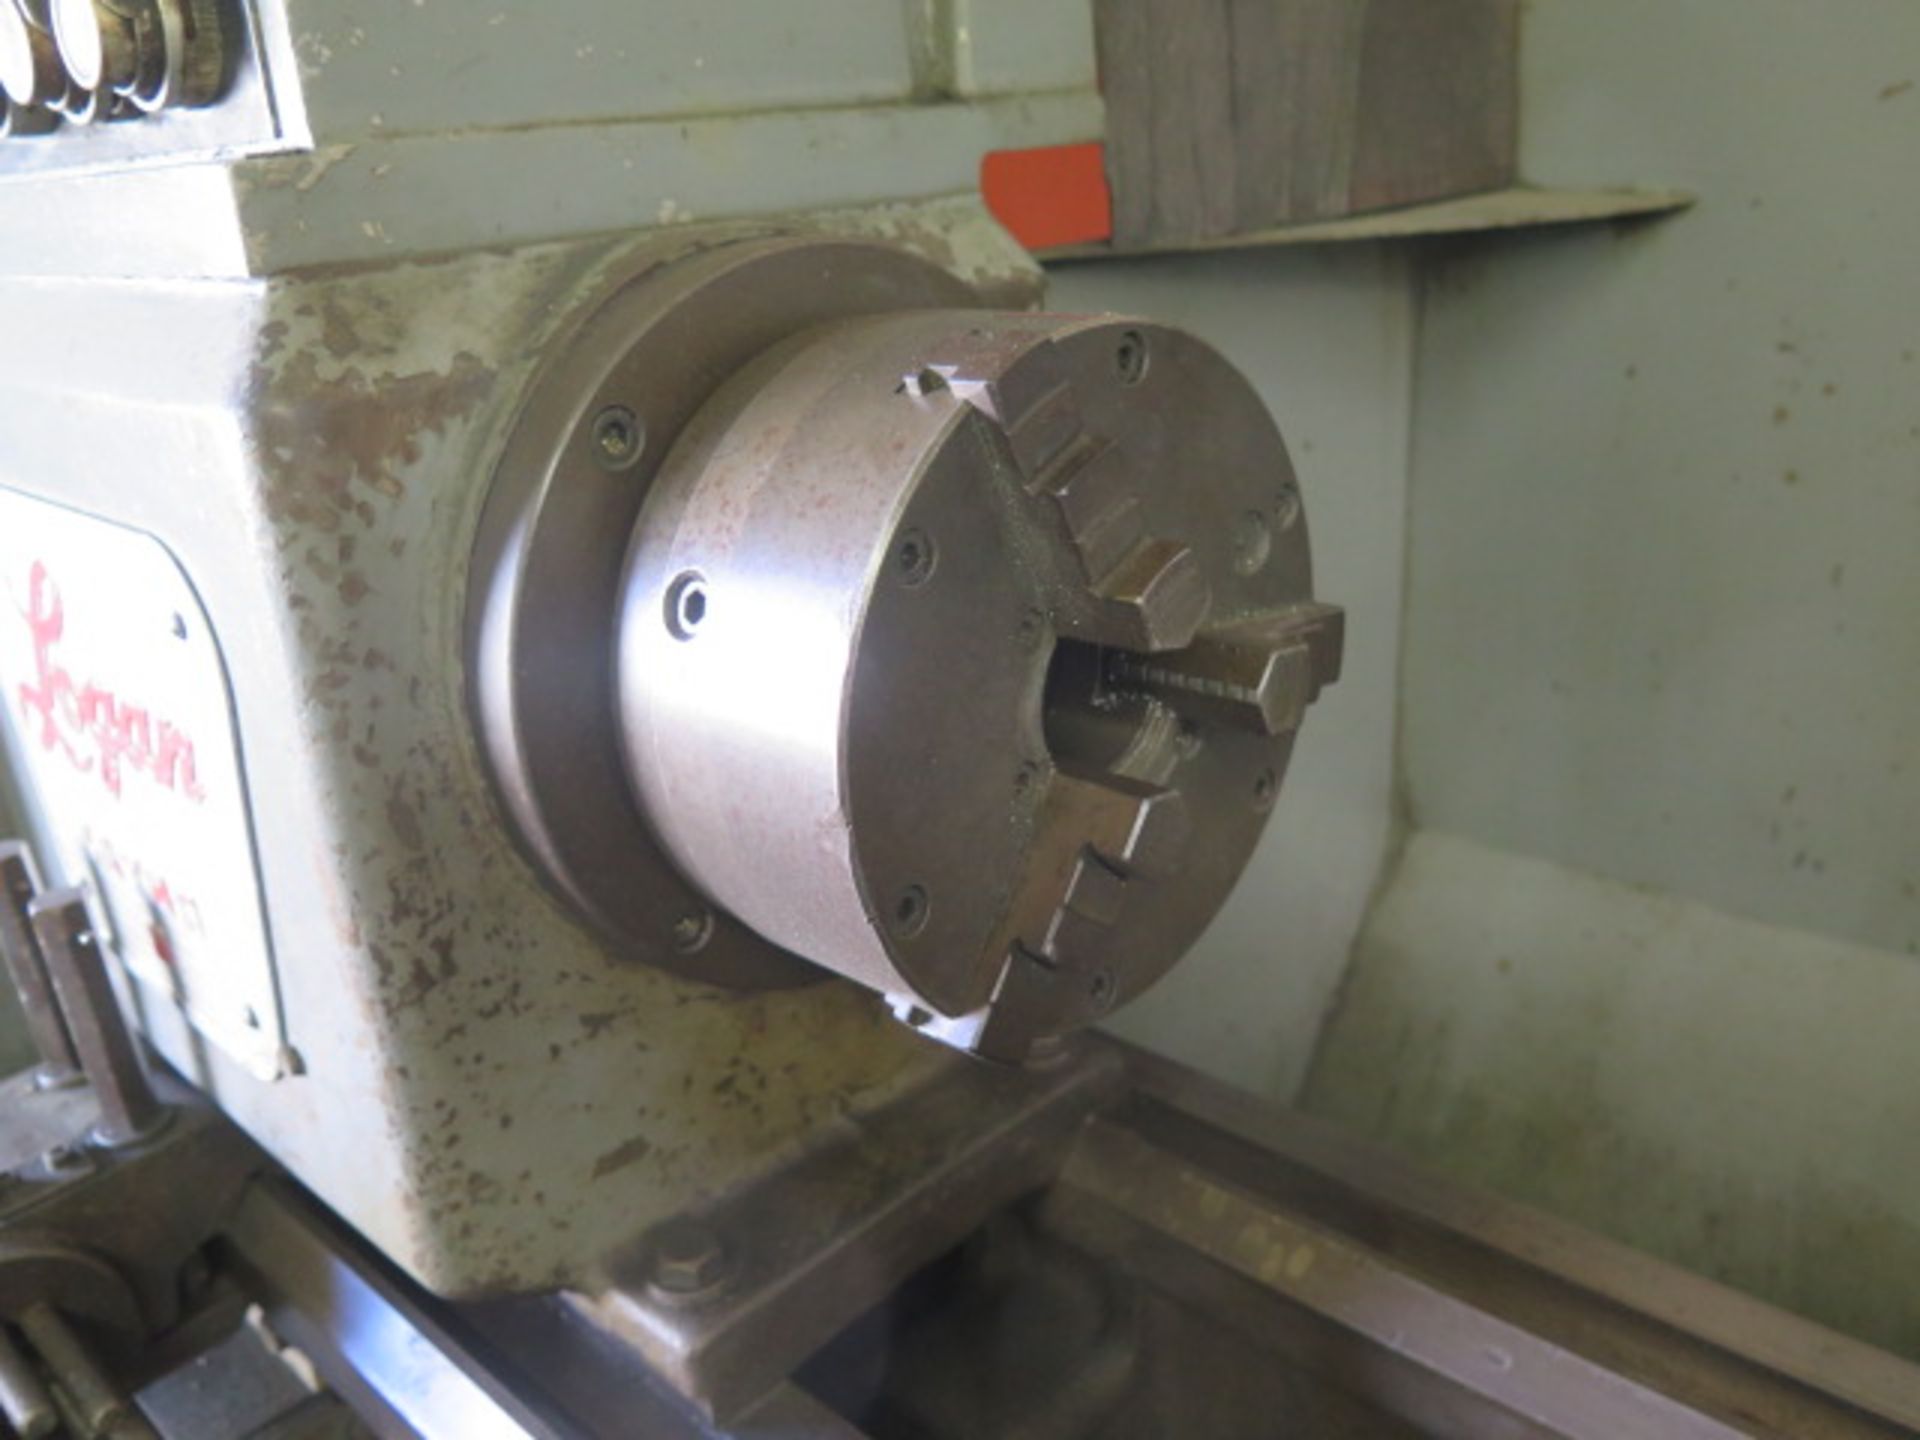 Logan mdl. 7515 Hand Chucker w/ 8-Station Turret, 350-2000 Adjustable RPM, 5C Spindle, SOLD AS IS - Image 5 of 10